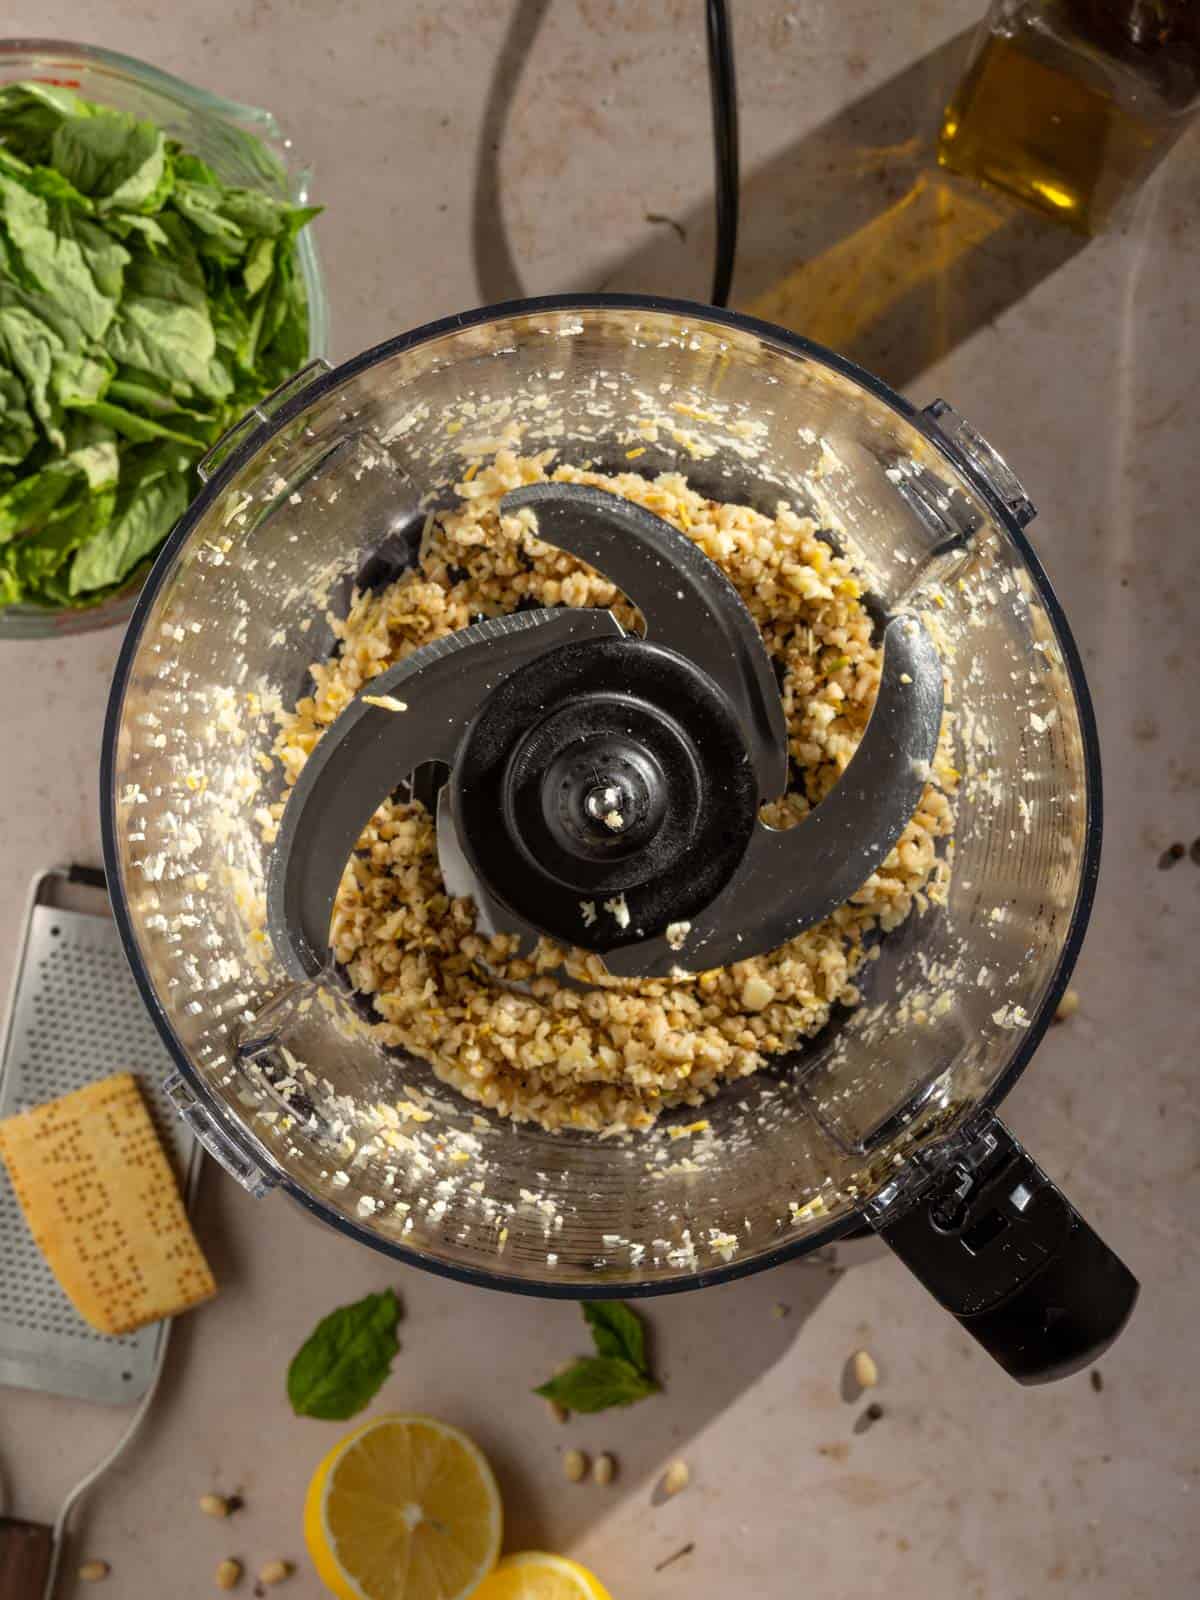 Chopped garlic and pine nuts in a food processor.